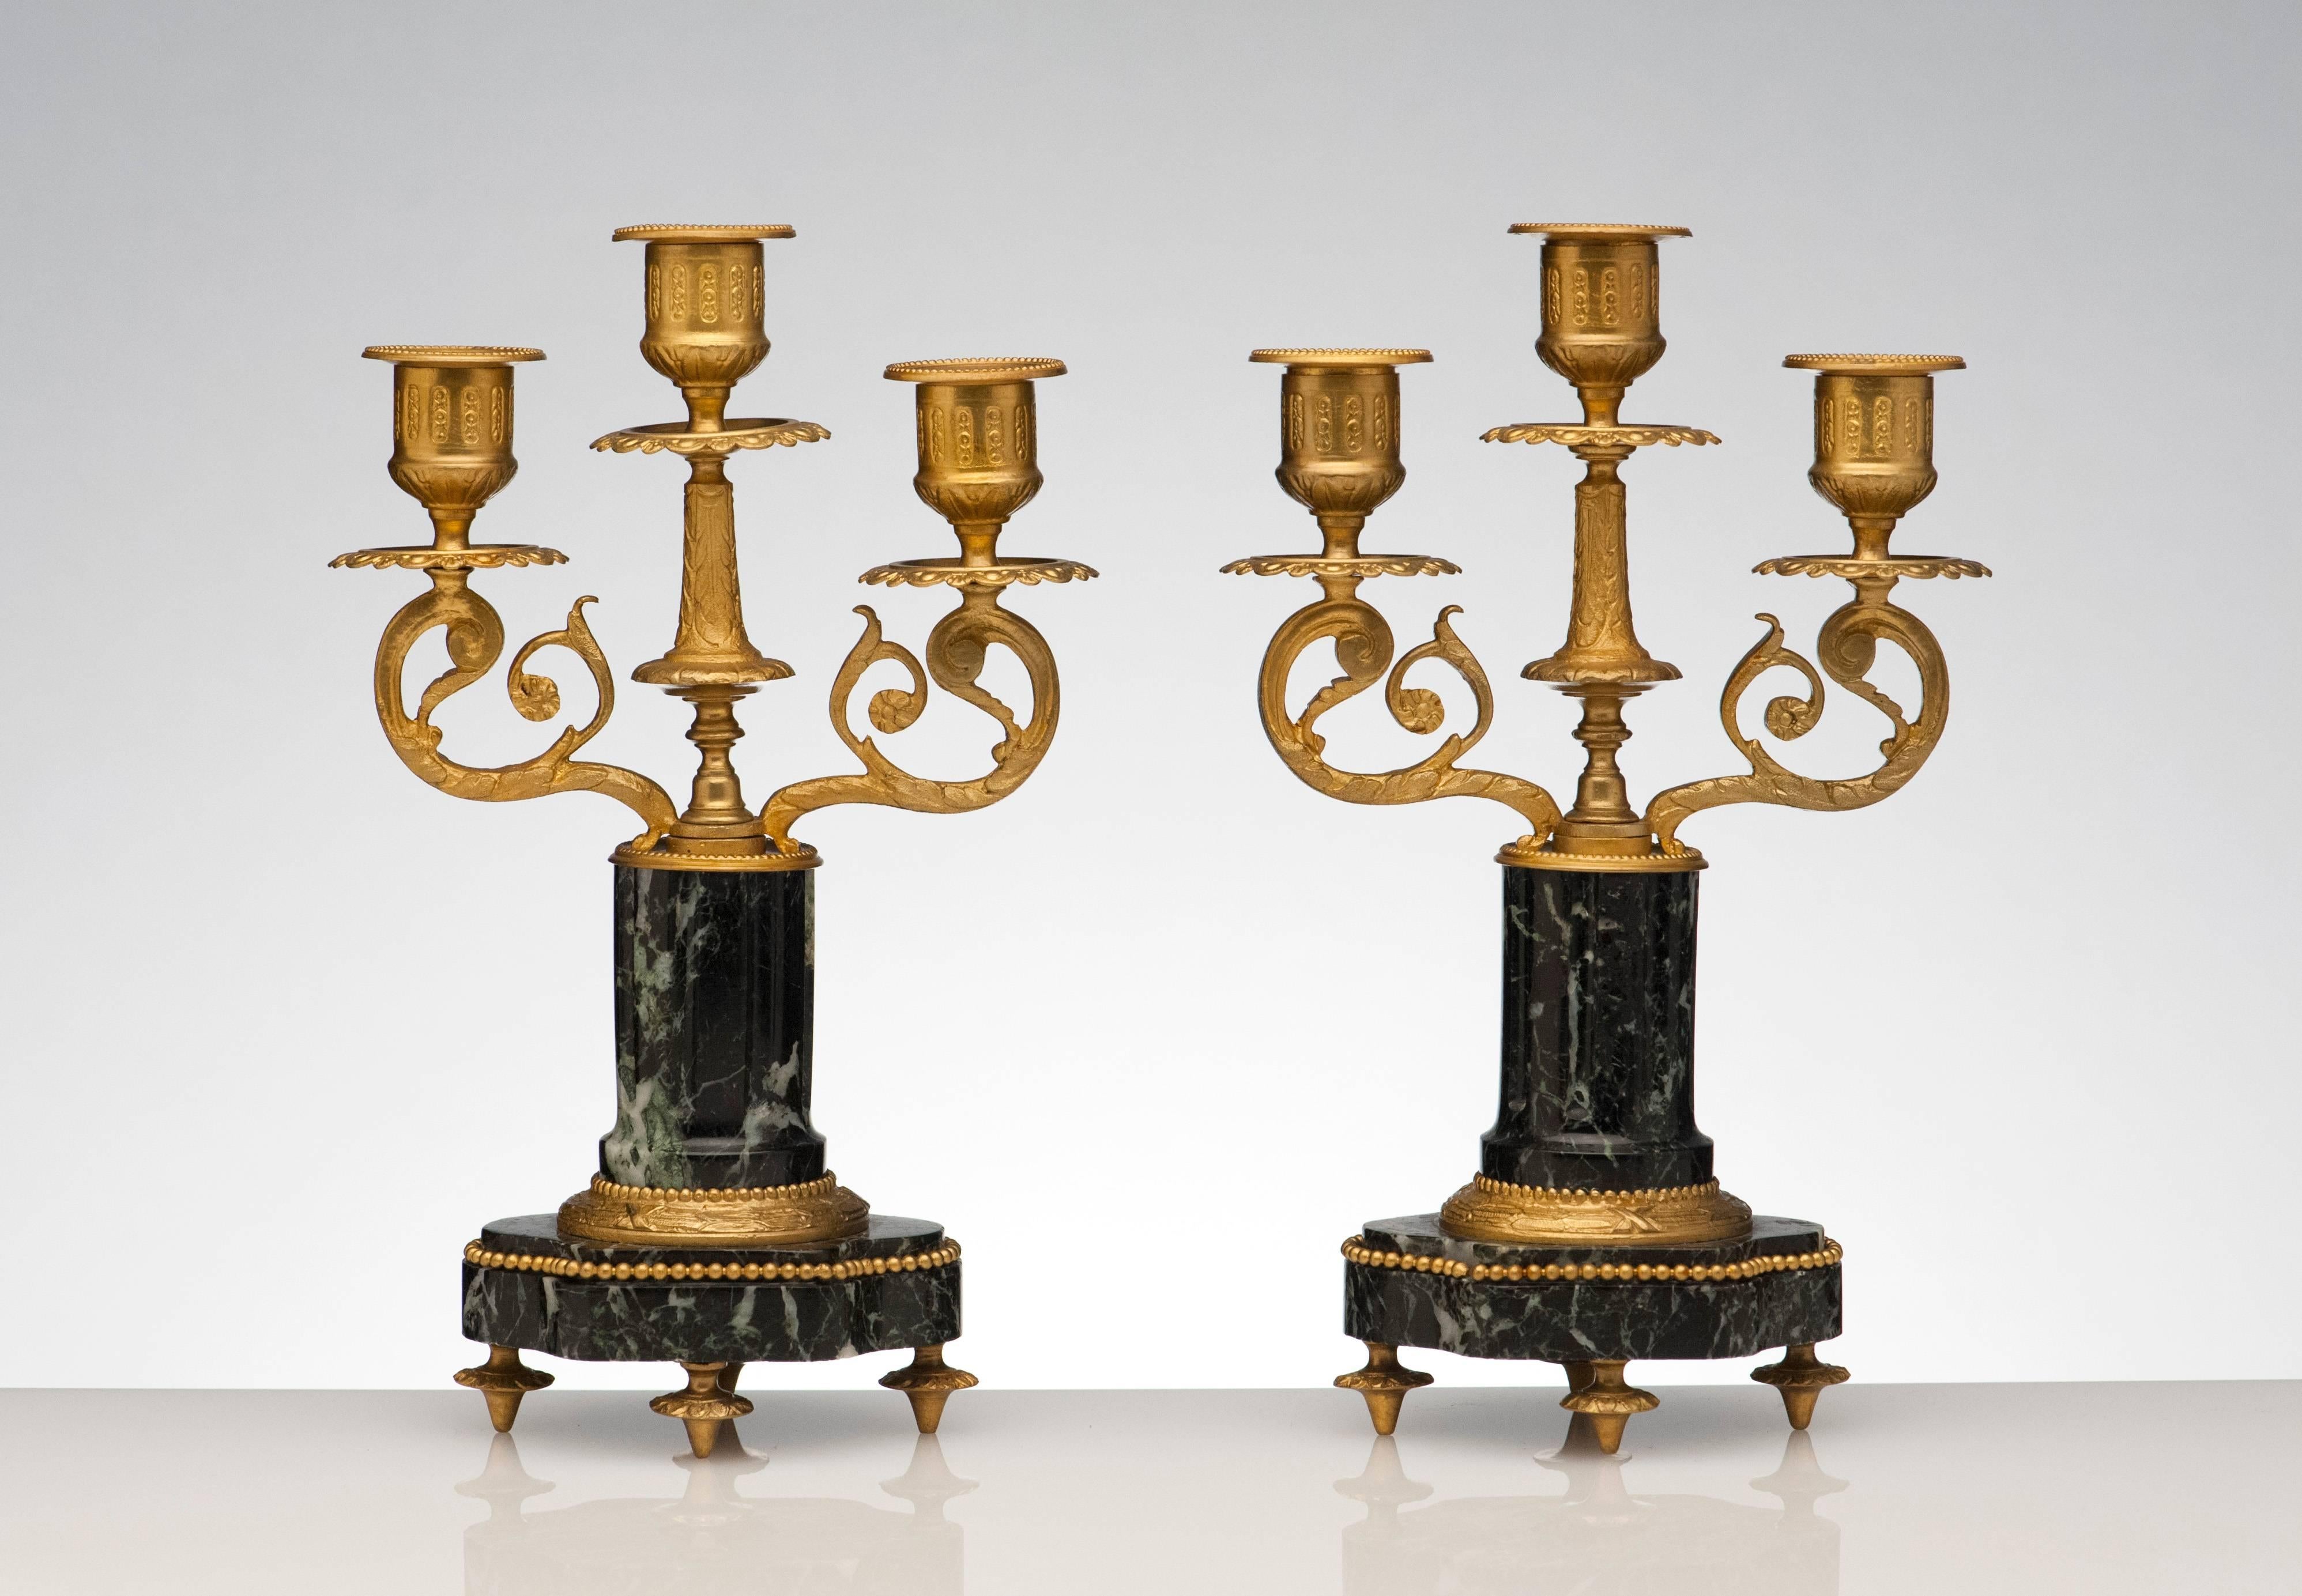 Finely made pair of candelabras from France, 1920s. Beautiful bronze detailing. Carved marble columns and base. Condition is excellent.